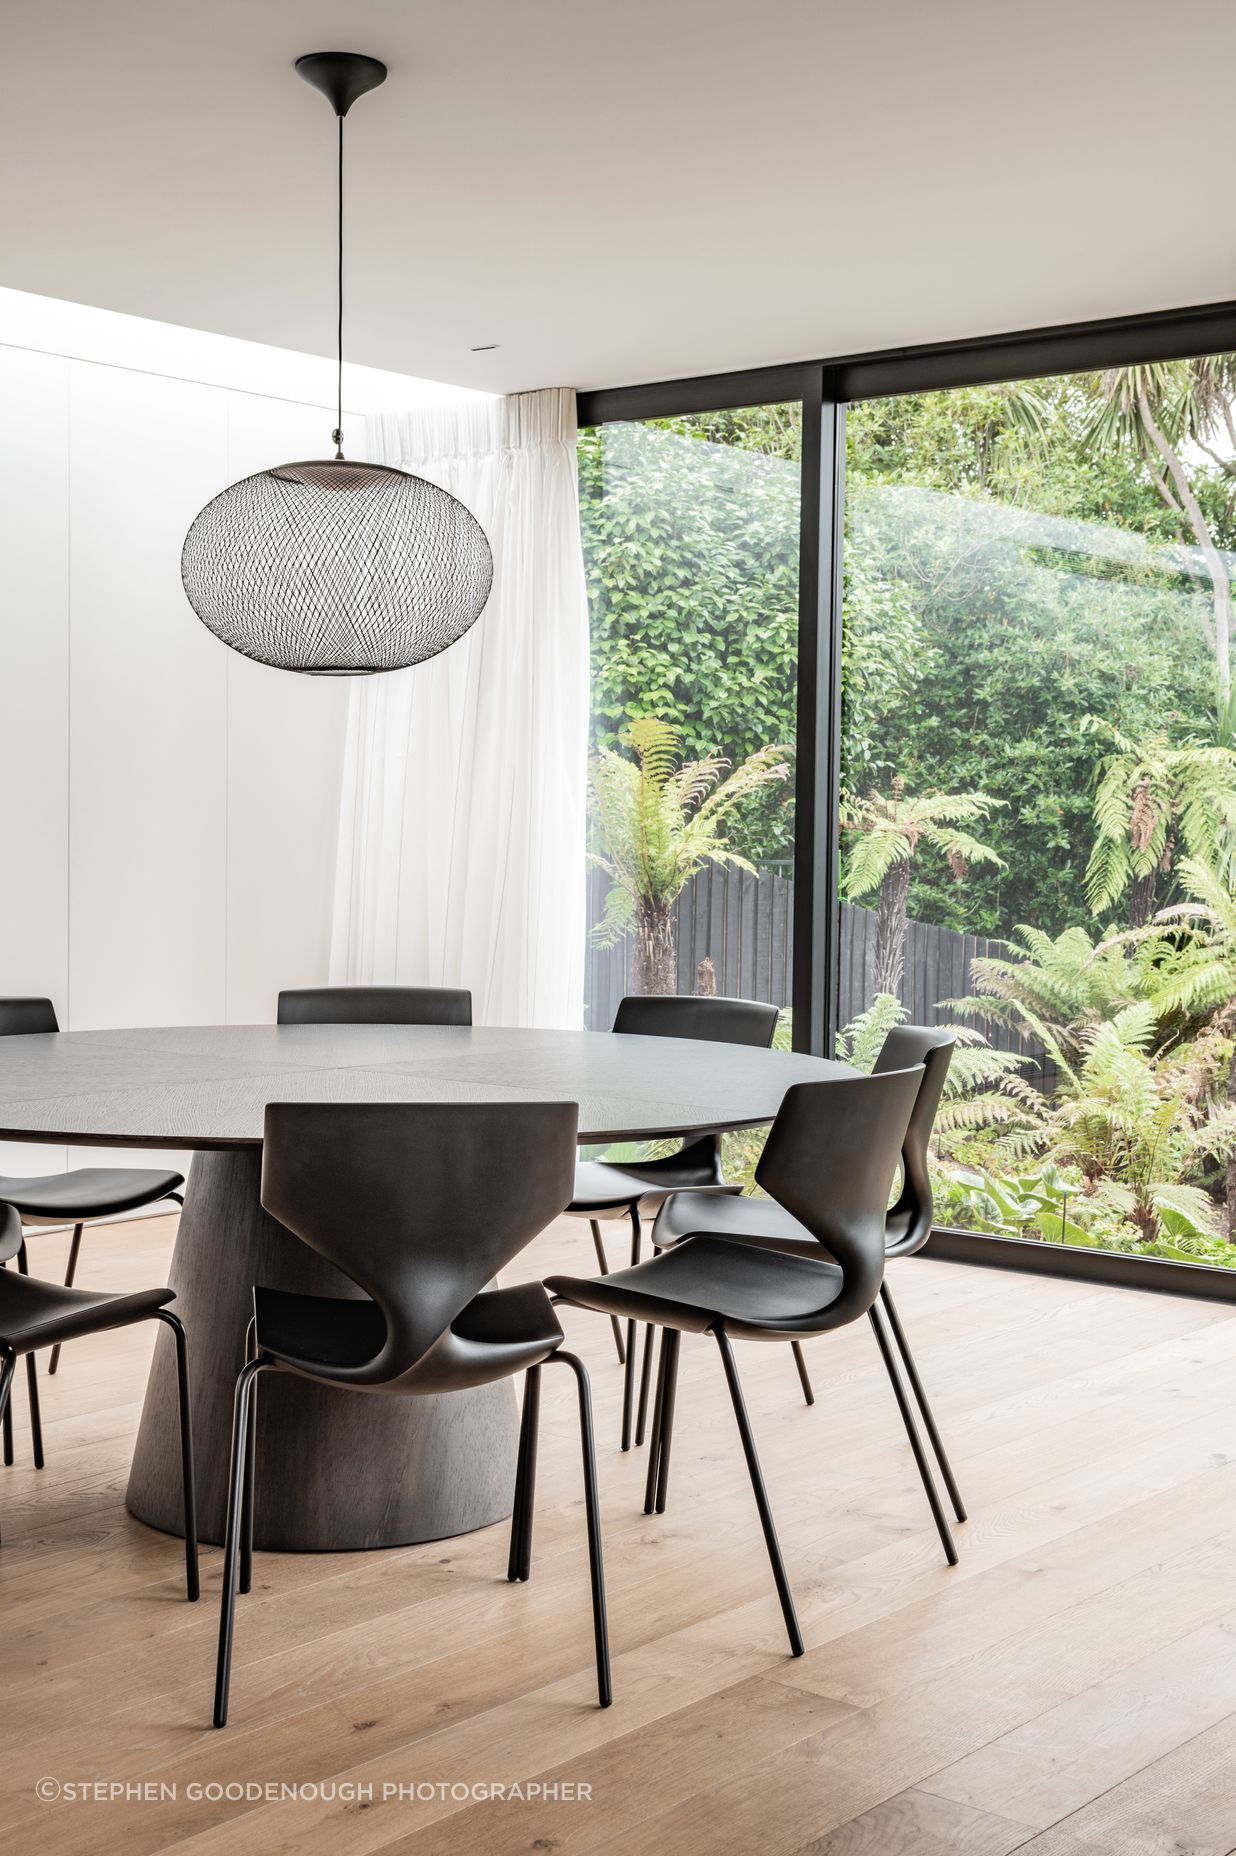 The dining area connects to the outdoors with a view to the stream at the bottom of the garden. “The key motivator is all about filling the house with light, because it hasn't got that direct northern orientation.”